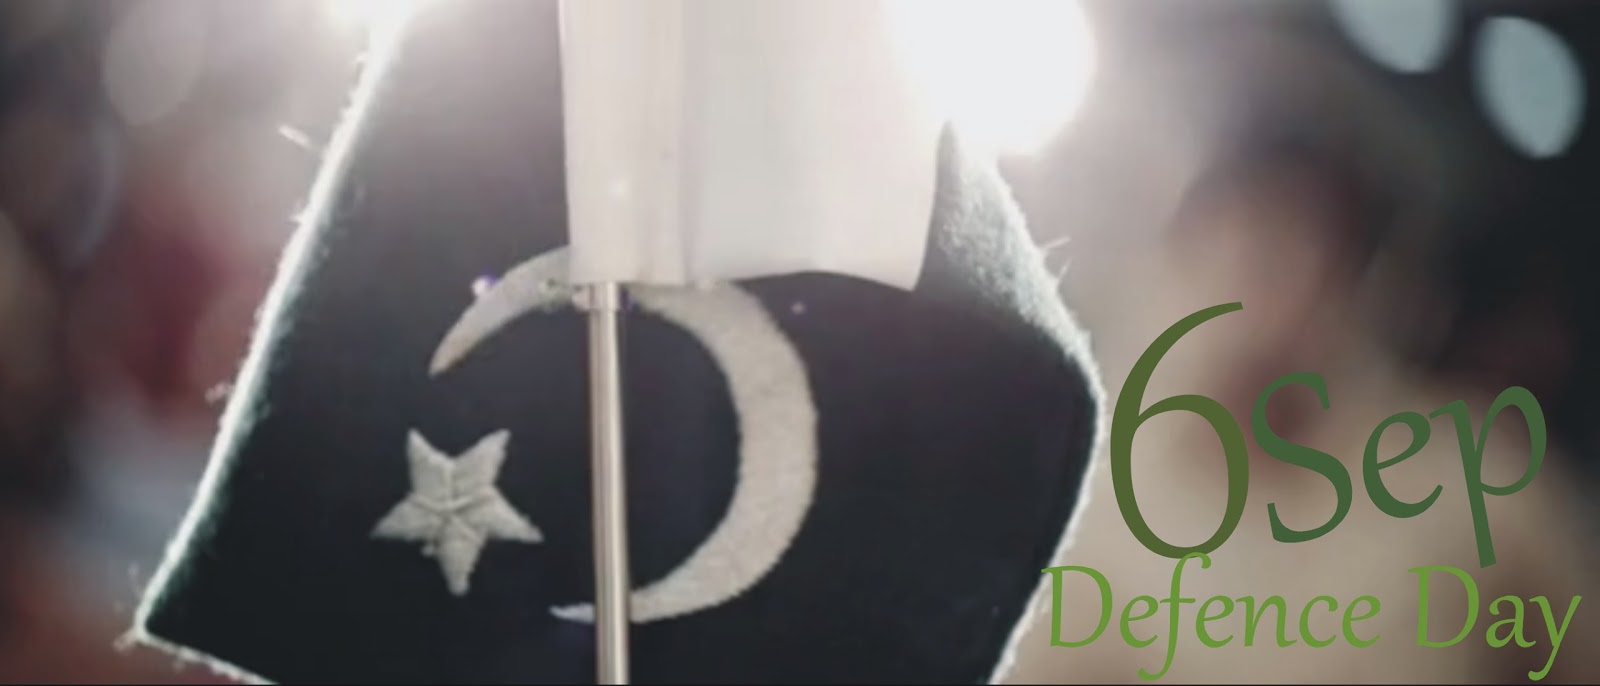 6 Sep Defence Day Pakistan Wishes